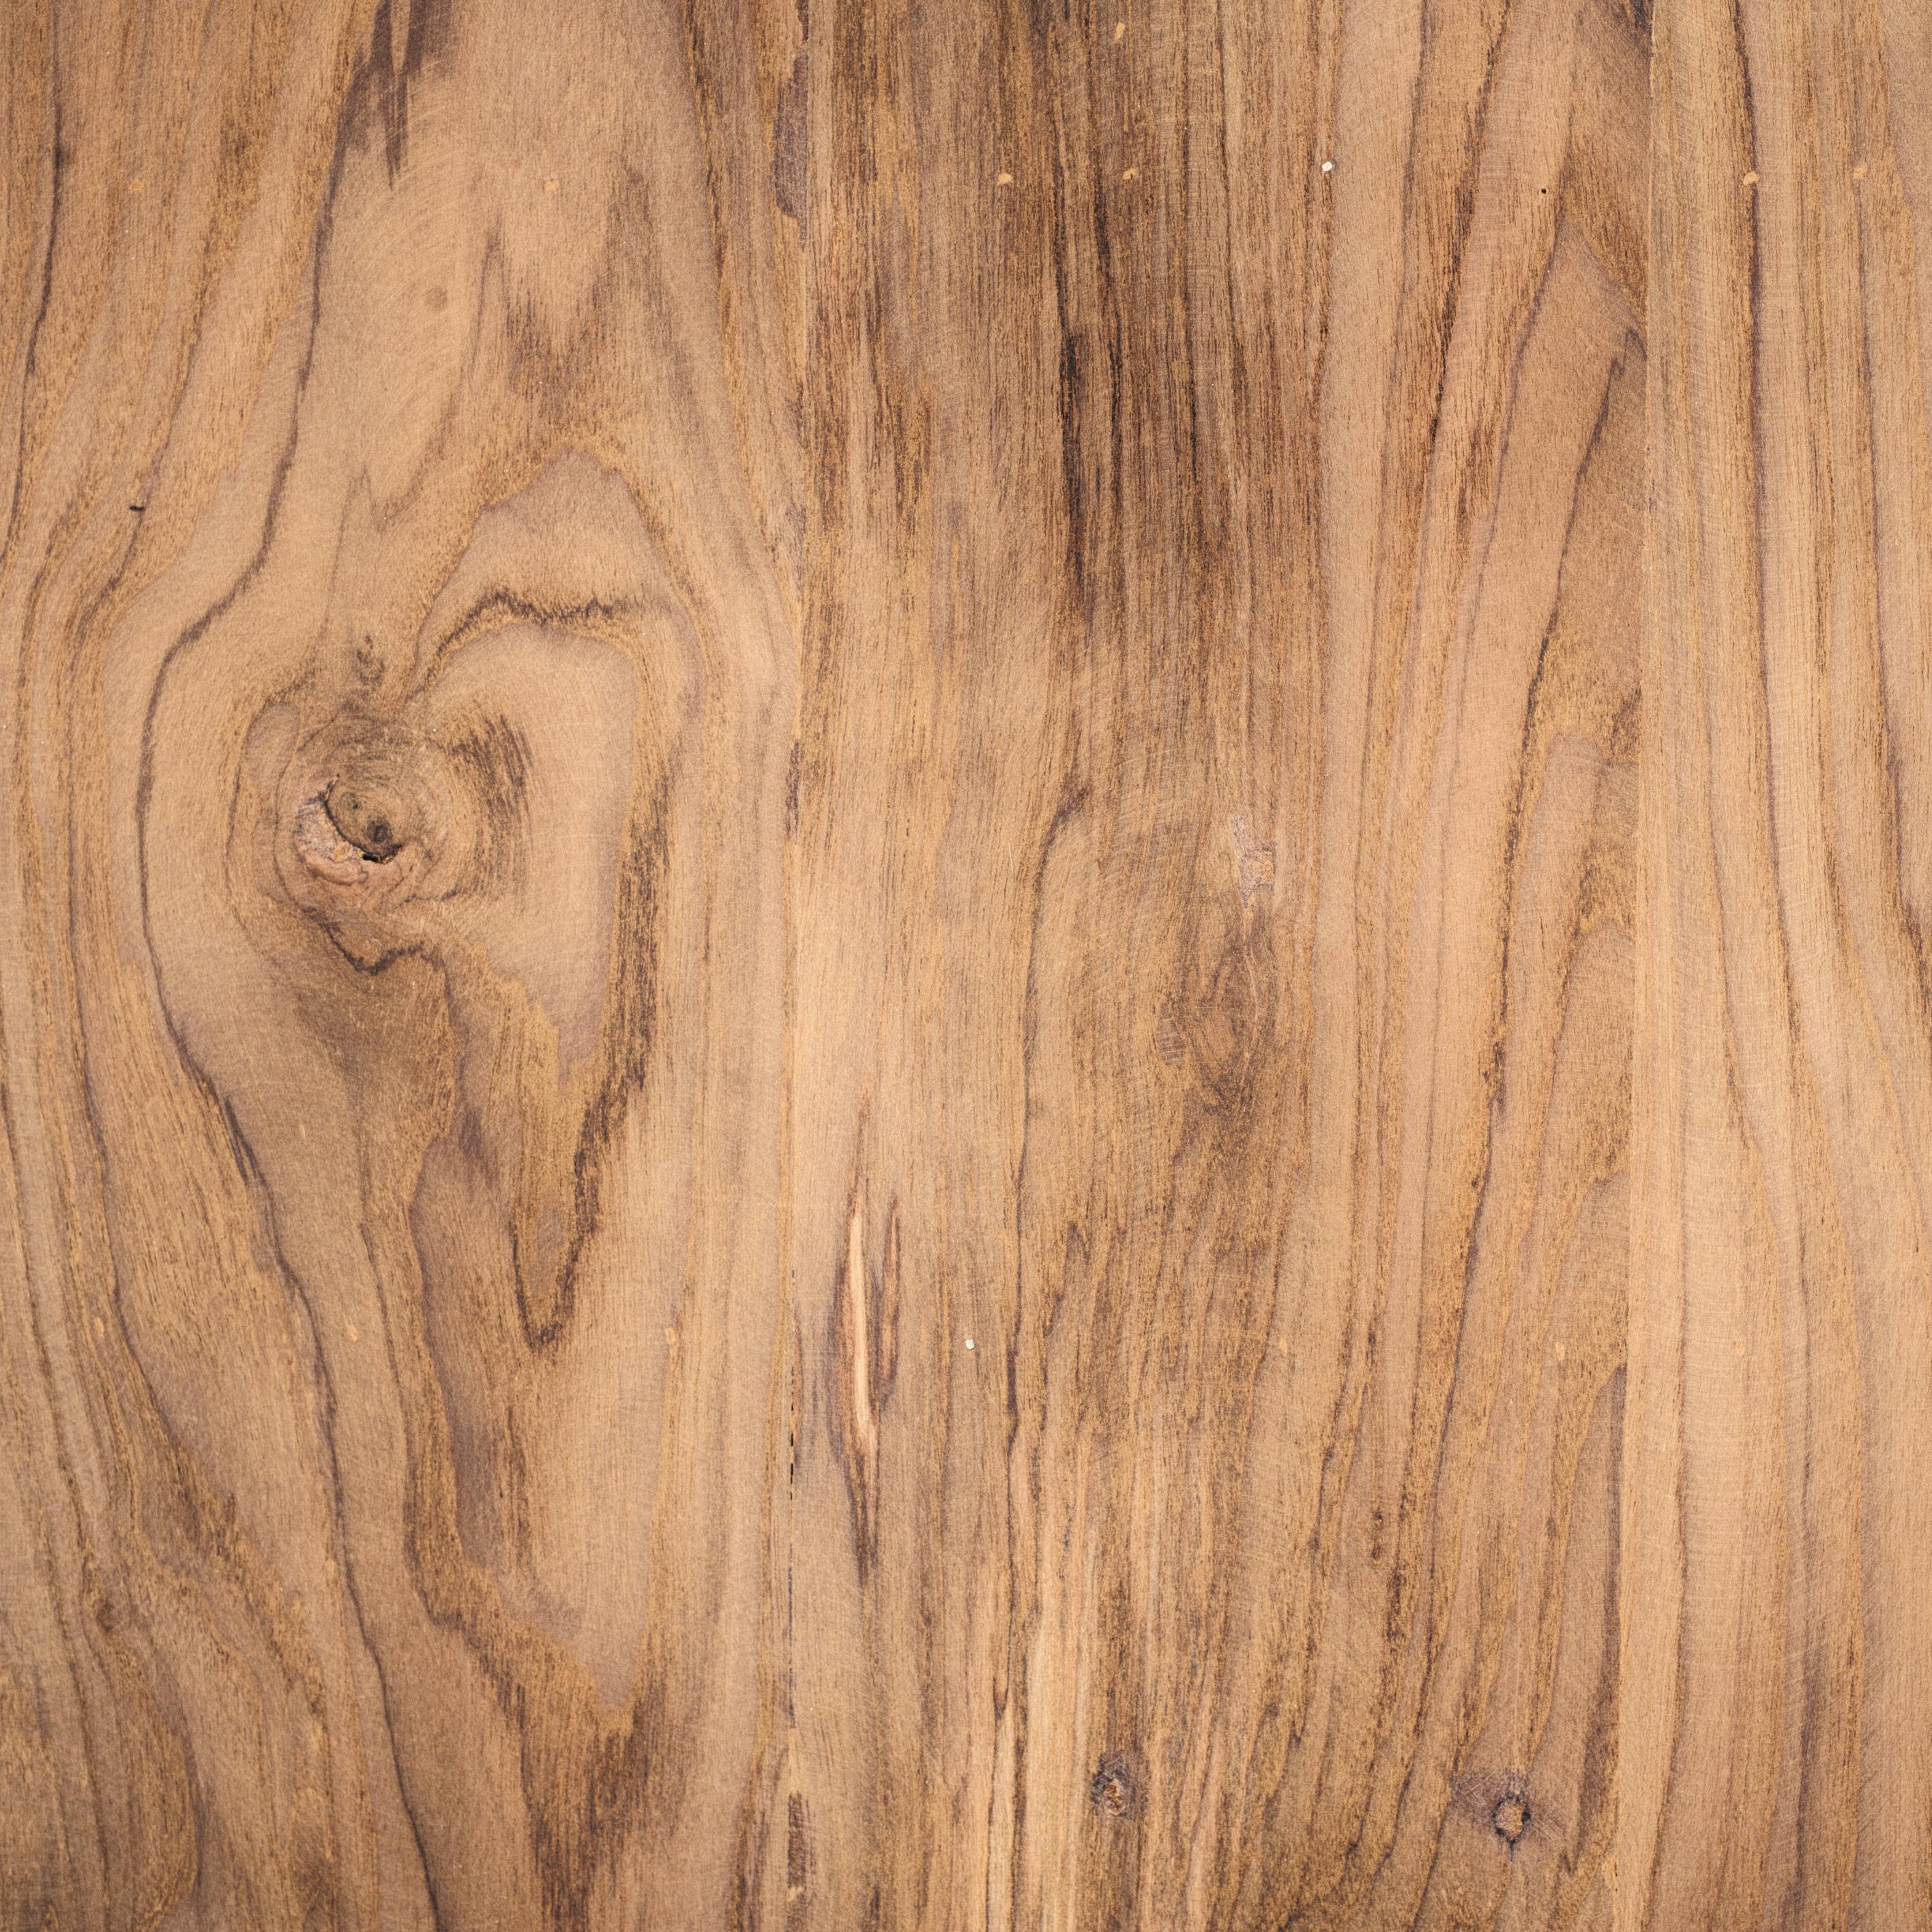 Brown Wooden Surface · Free Stock Photo